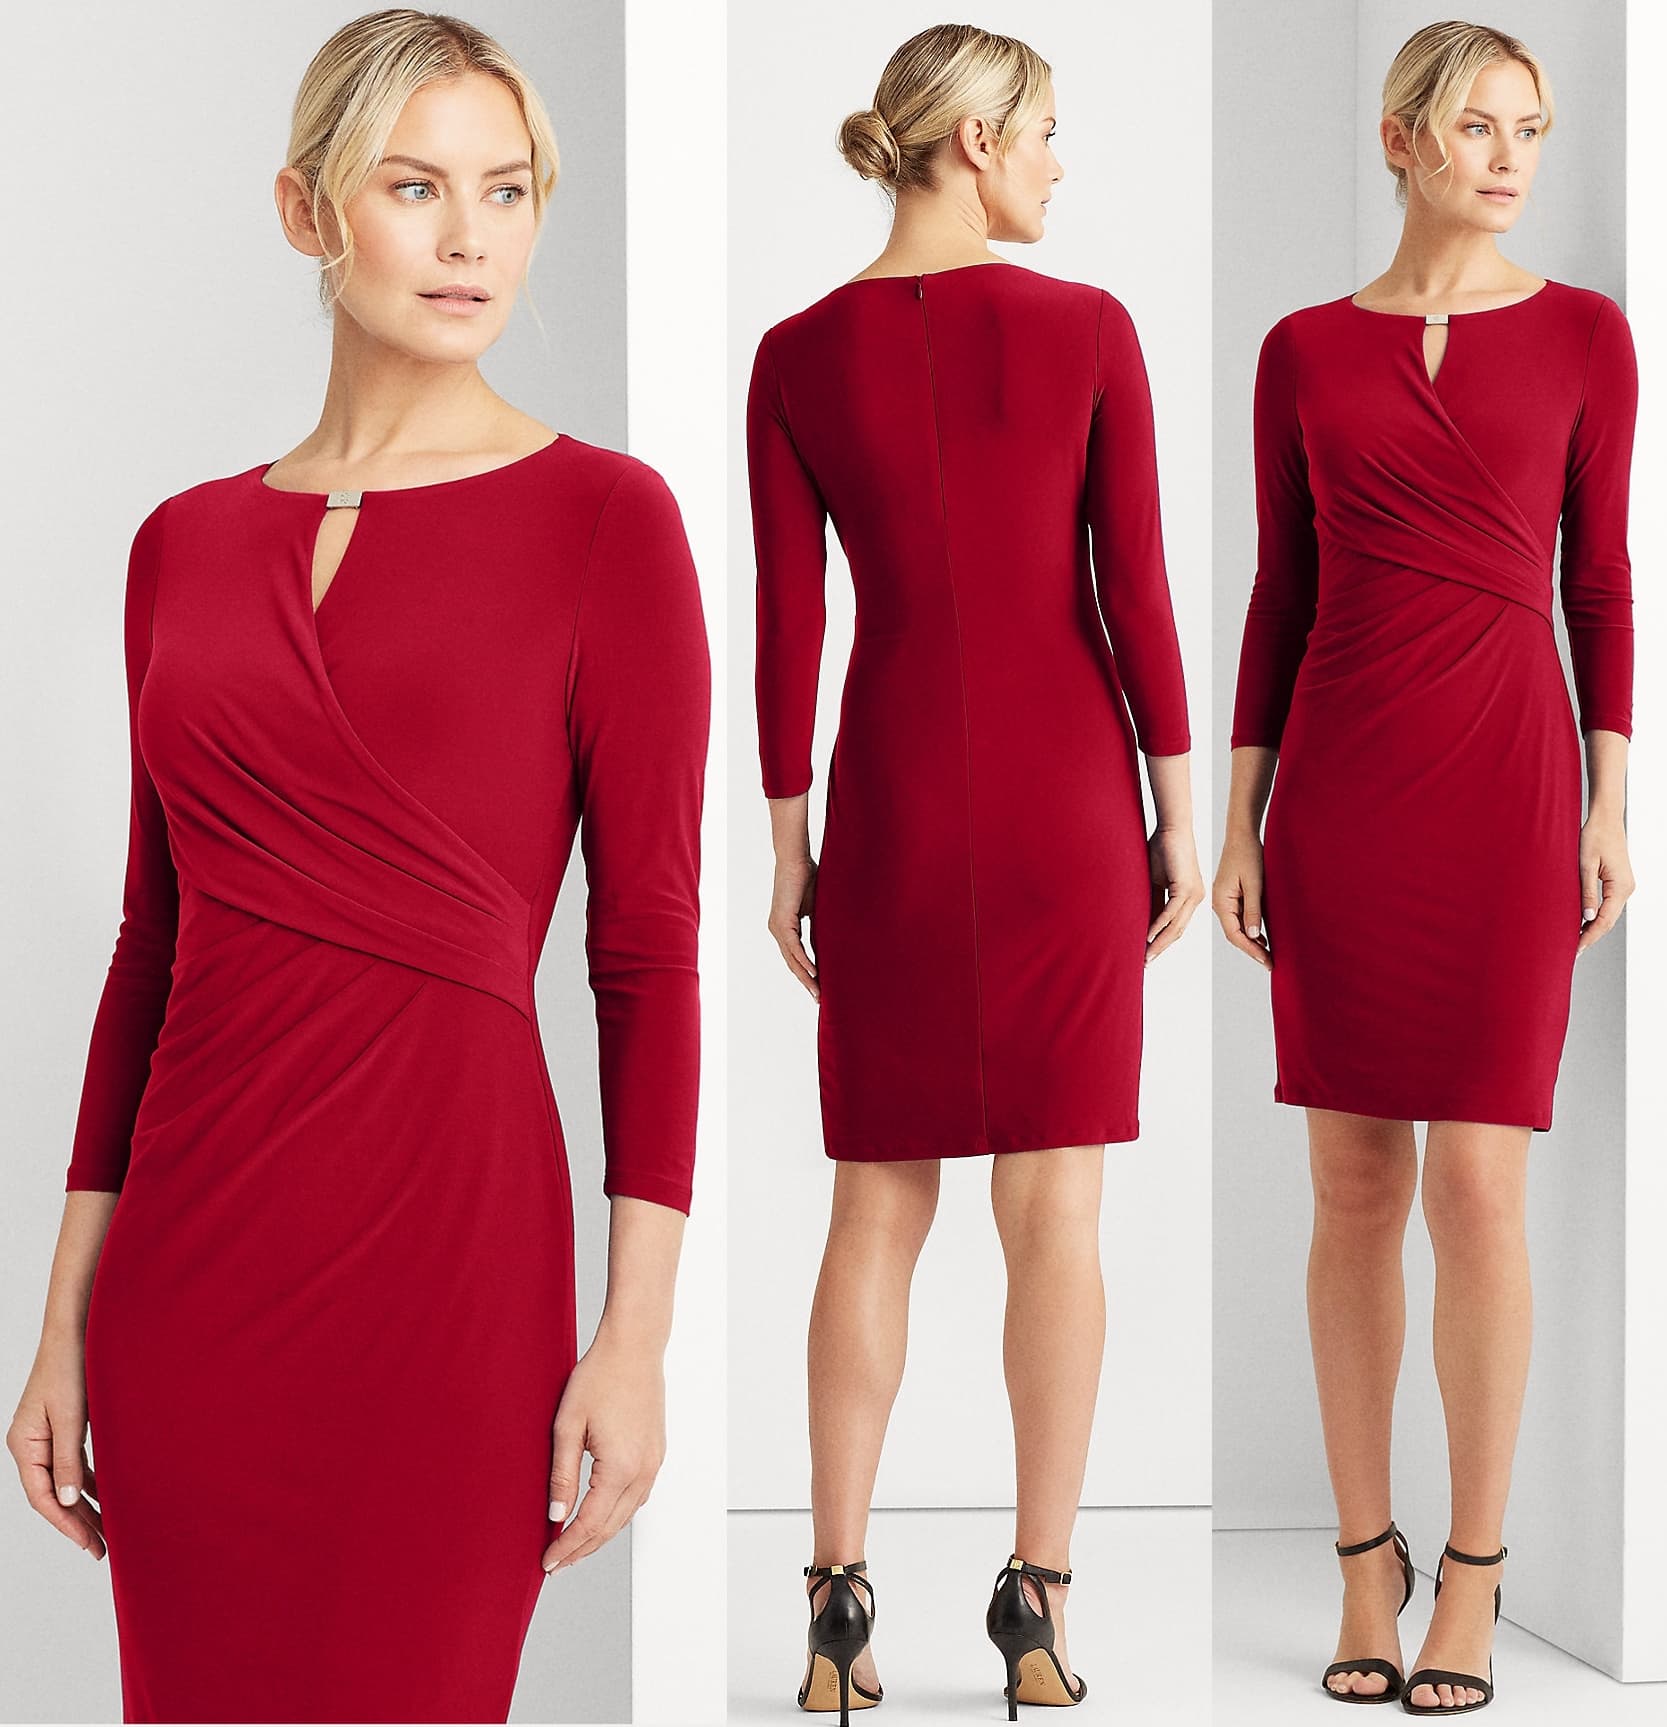 The ideal day-to-night look, this lipstick-red jersey dress is designed with a wrap-style bodice to complement the waist and finished with a gold-tone "LRL"-engraved metal plate at the neck